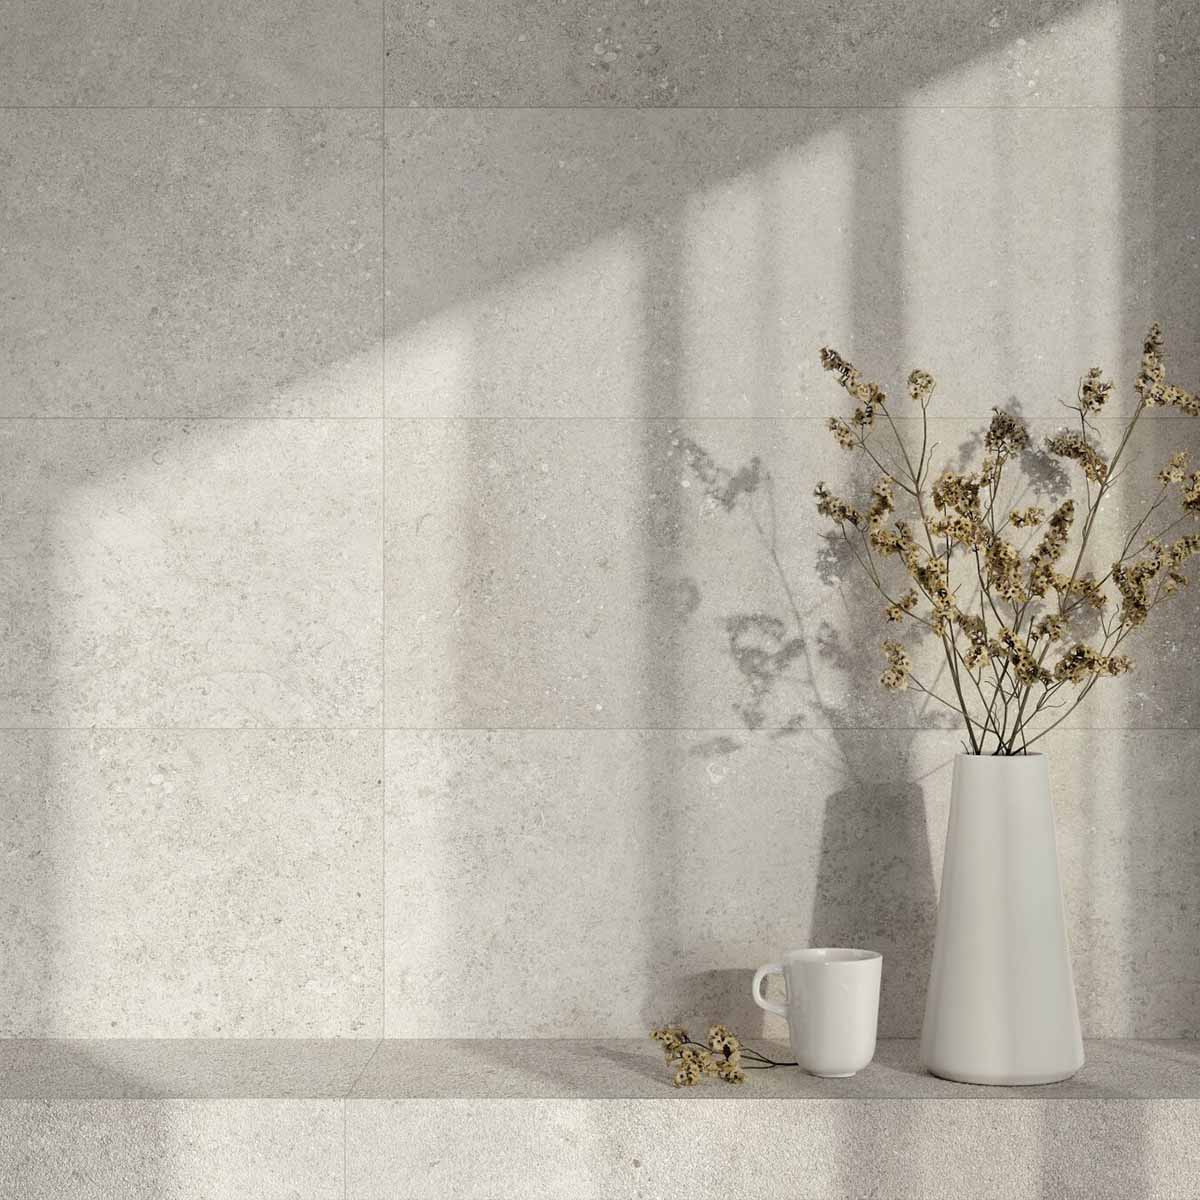 cluny silver stone effect textured ceramic wall tile 33x100cm